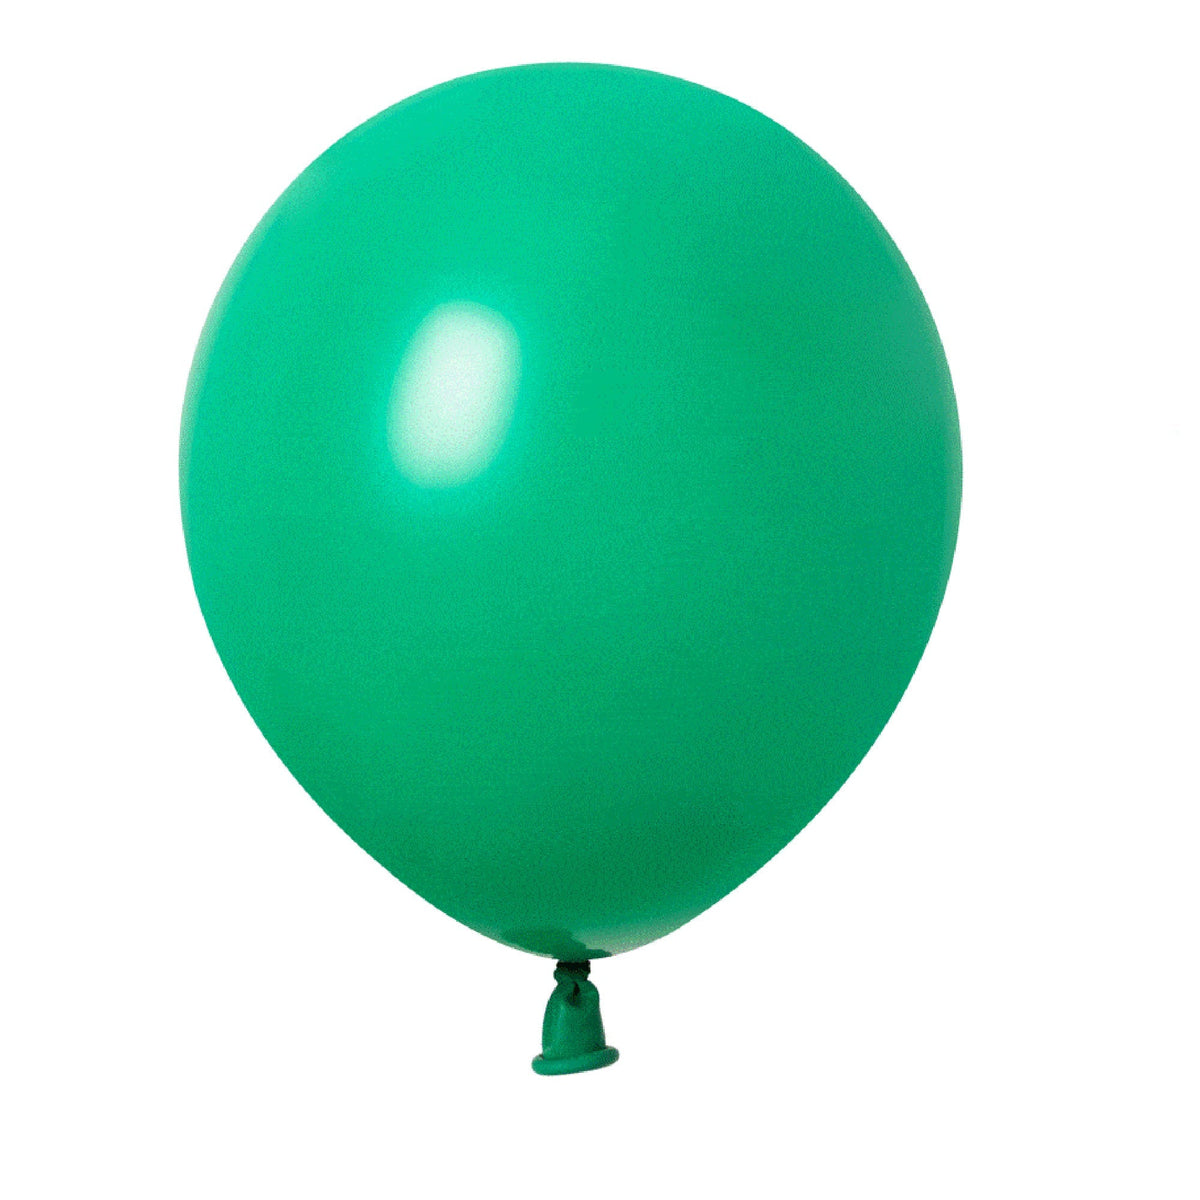 WIDE OCEAN INTERNATIONAL TRADE BEIJING CO., LTD Balloons Mid Green Latex Balloons, 5 Inches, 100 Count